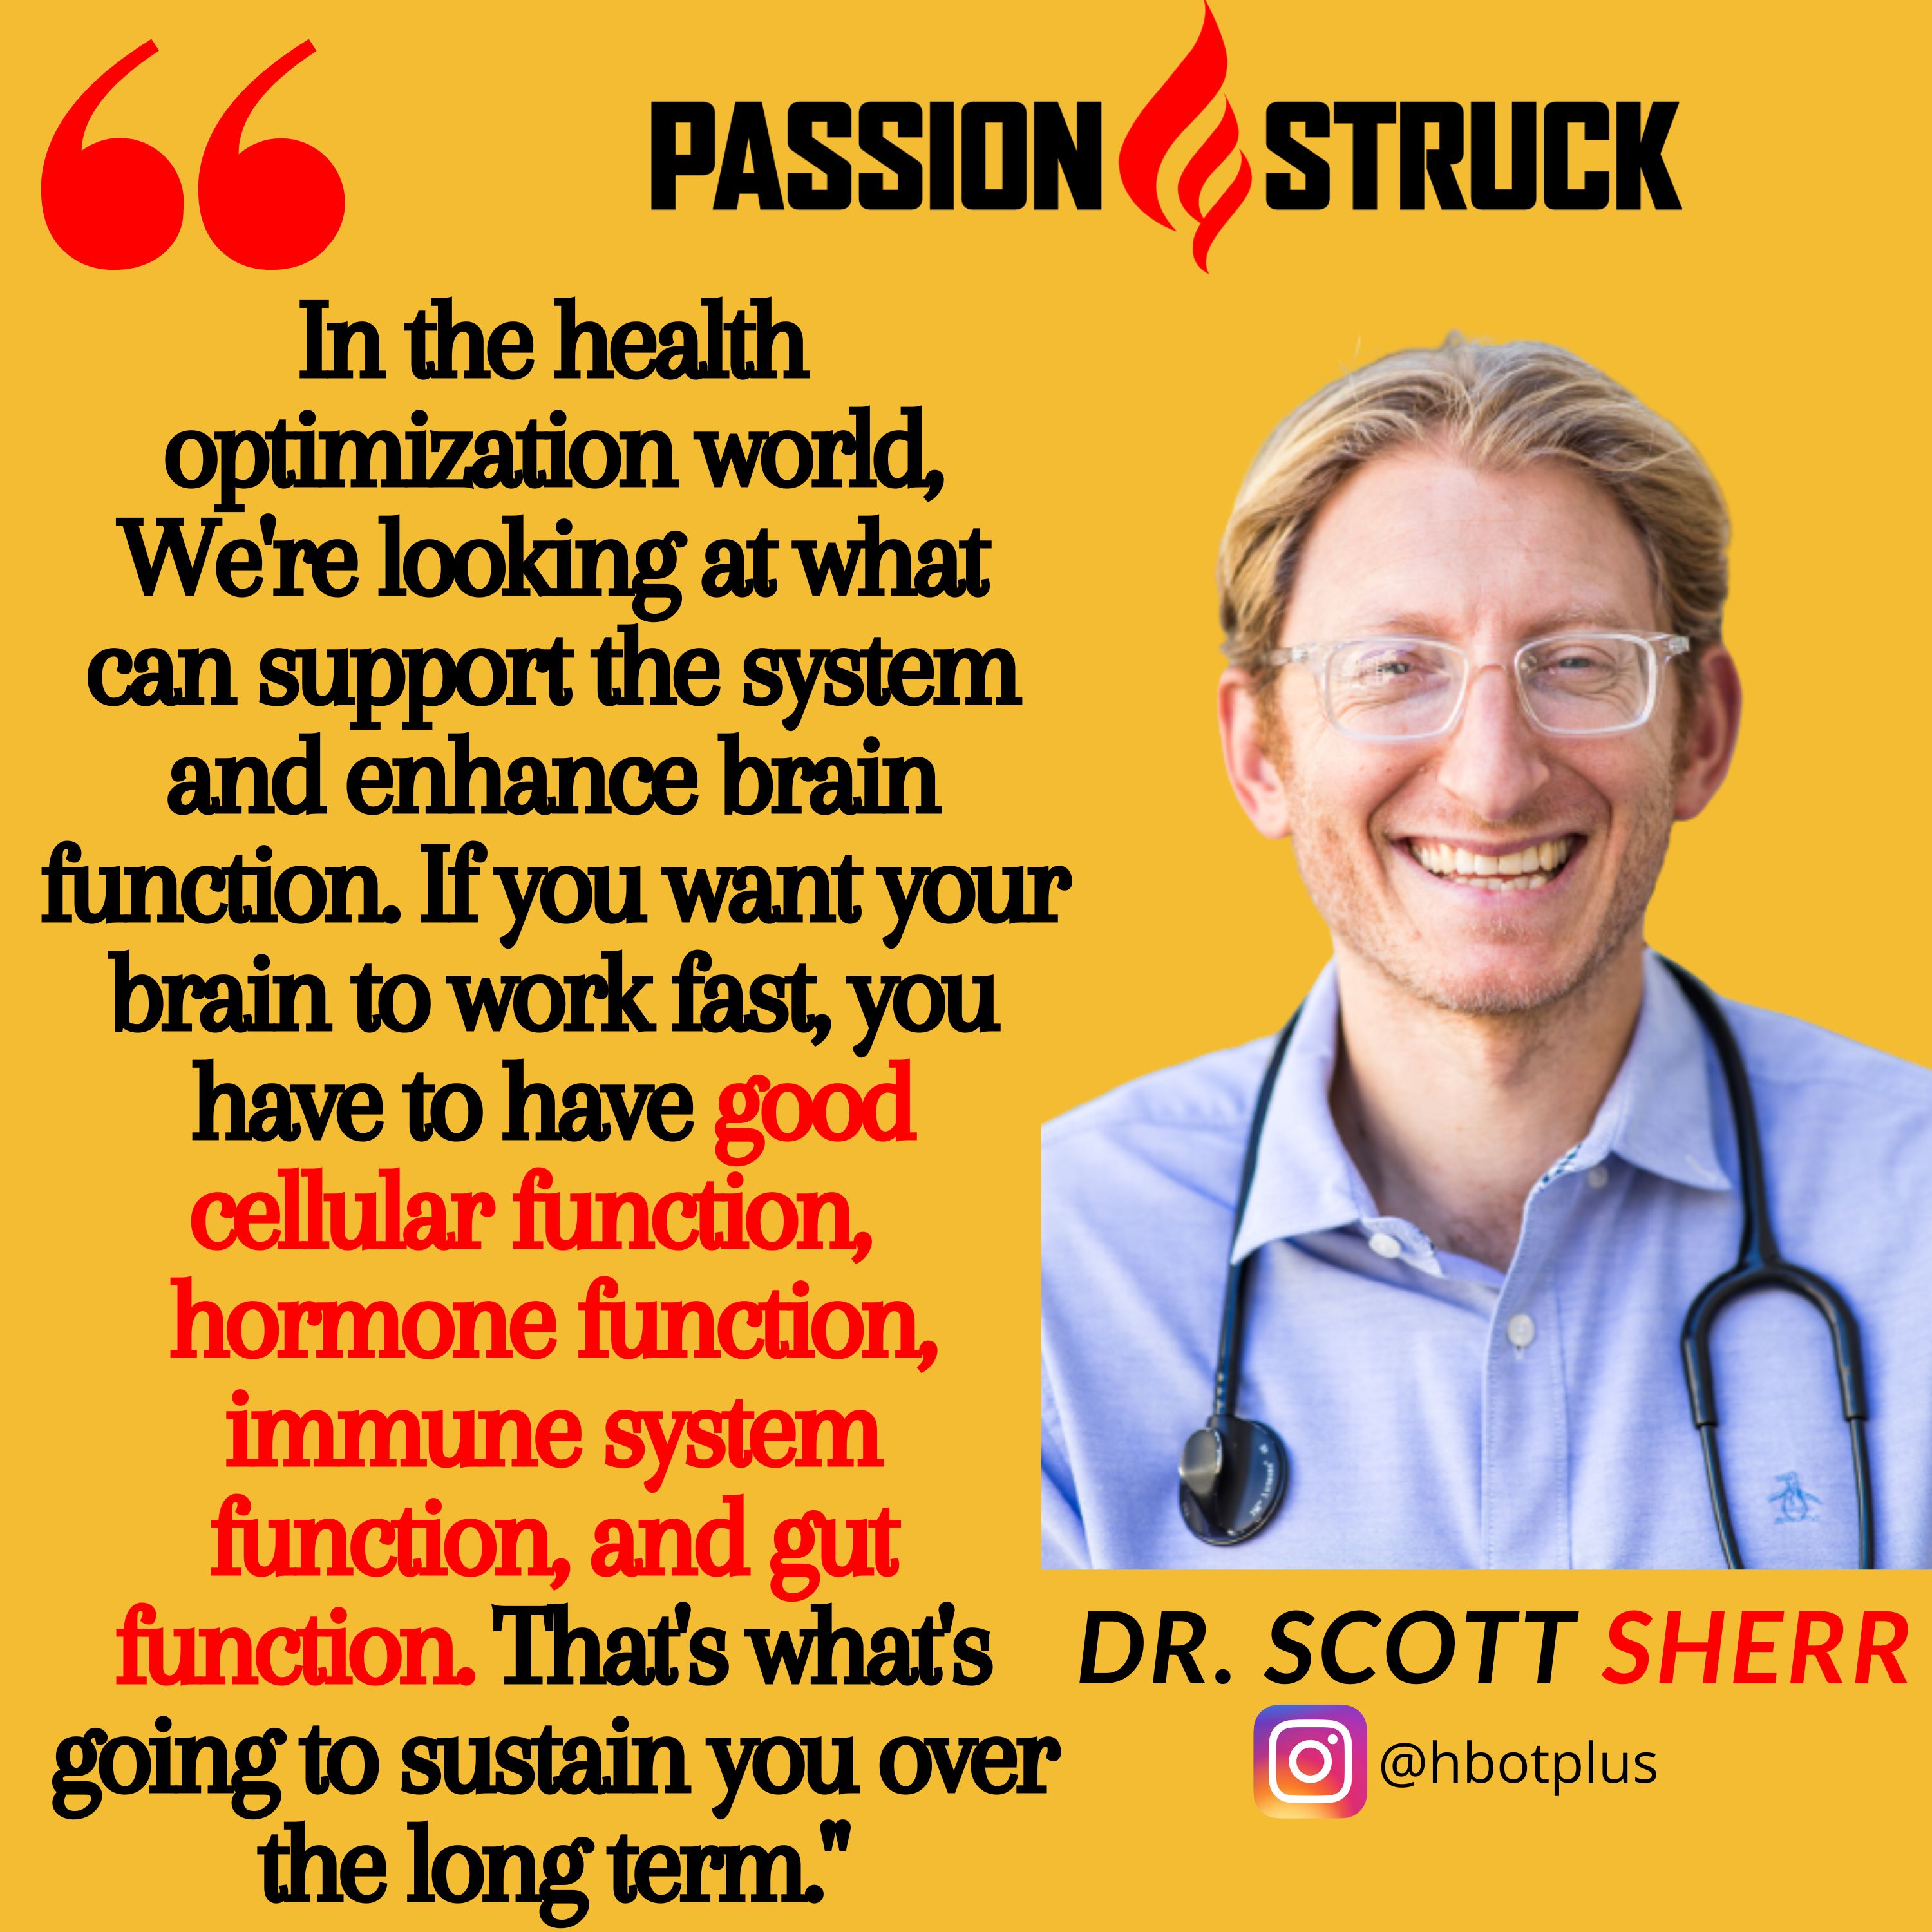 Dr. Scott Sherr quote about optimal health for passion struck